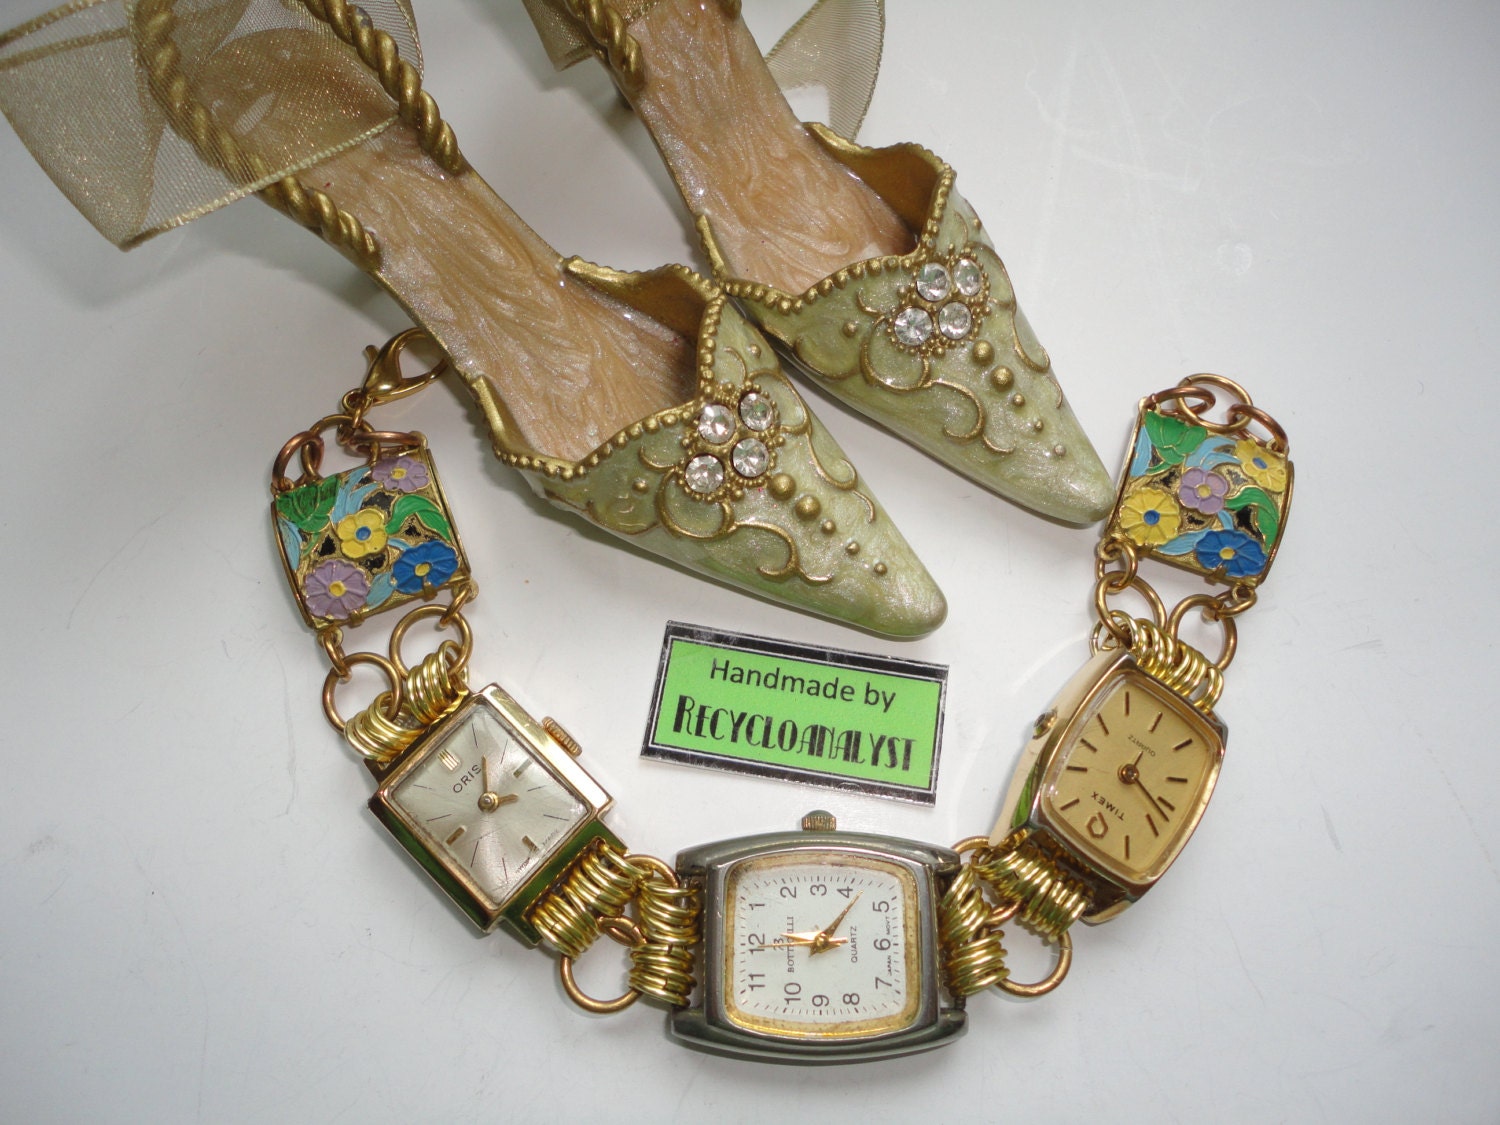 Valentines Gift Recycled Vintage Watches With Vintage Enamel Floral Panels And Working Quartz Watch Bracelet Handmade By Recycloanalyst